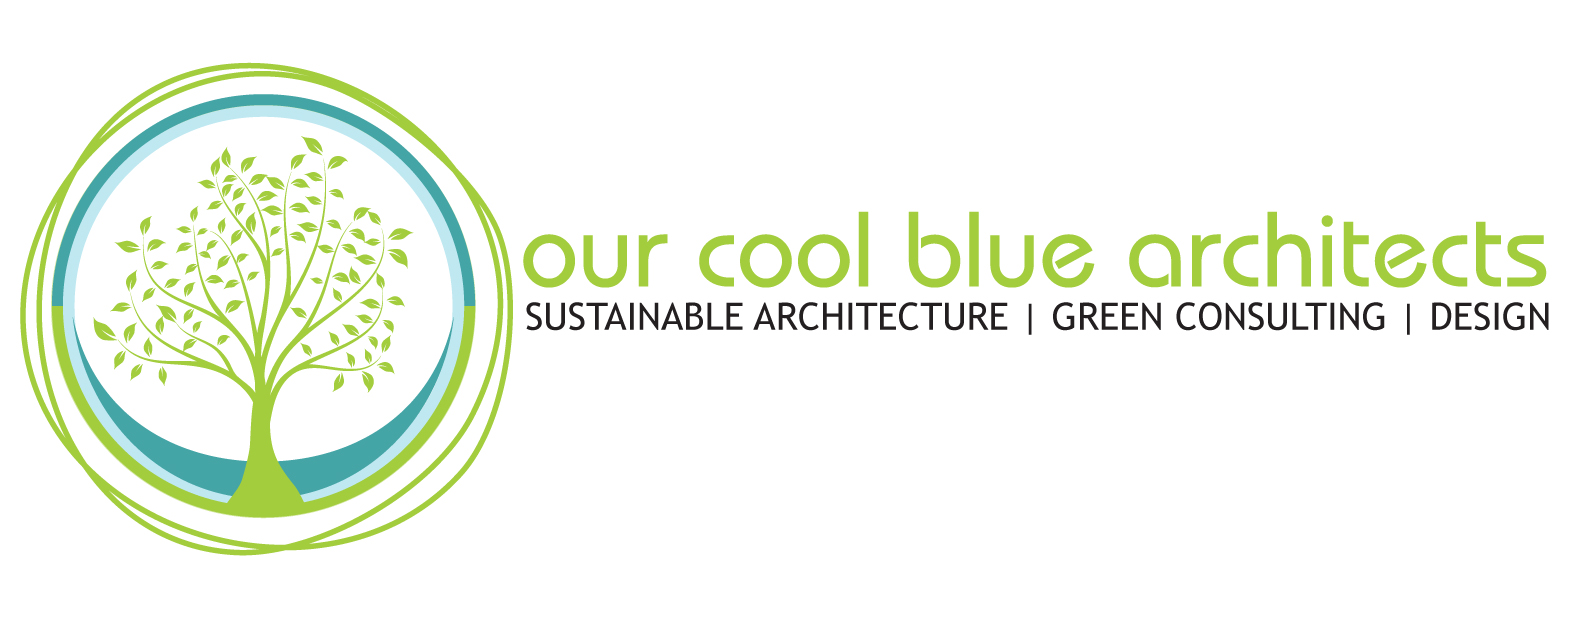 Opportunities Intern Architect or Senior Level Architectural Technologist